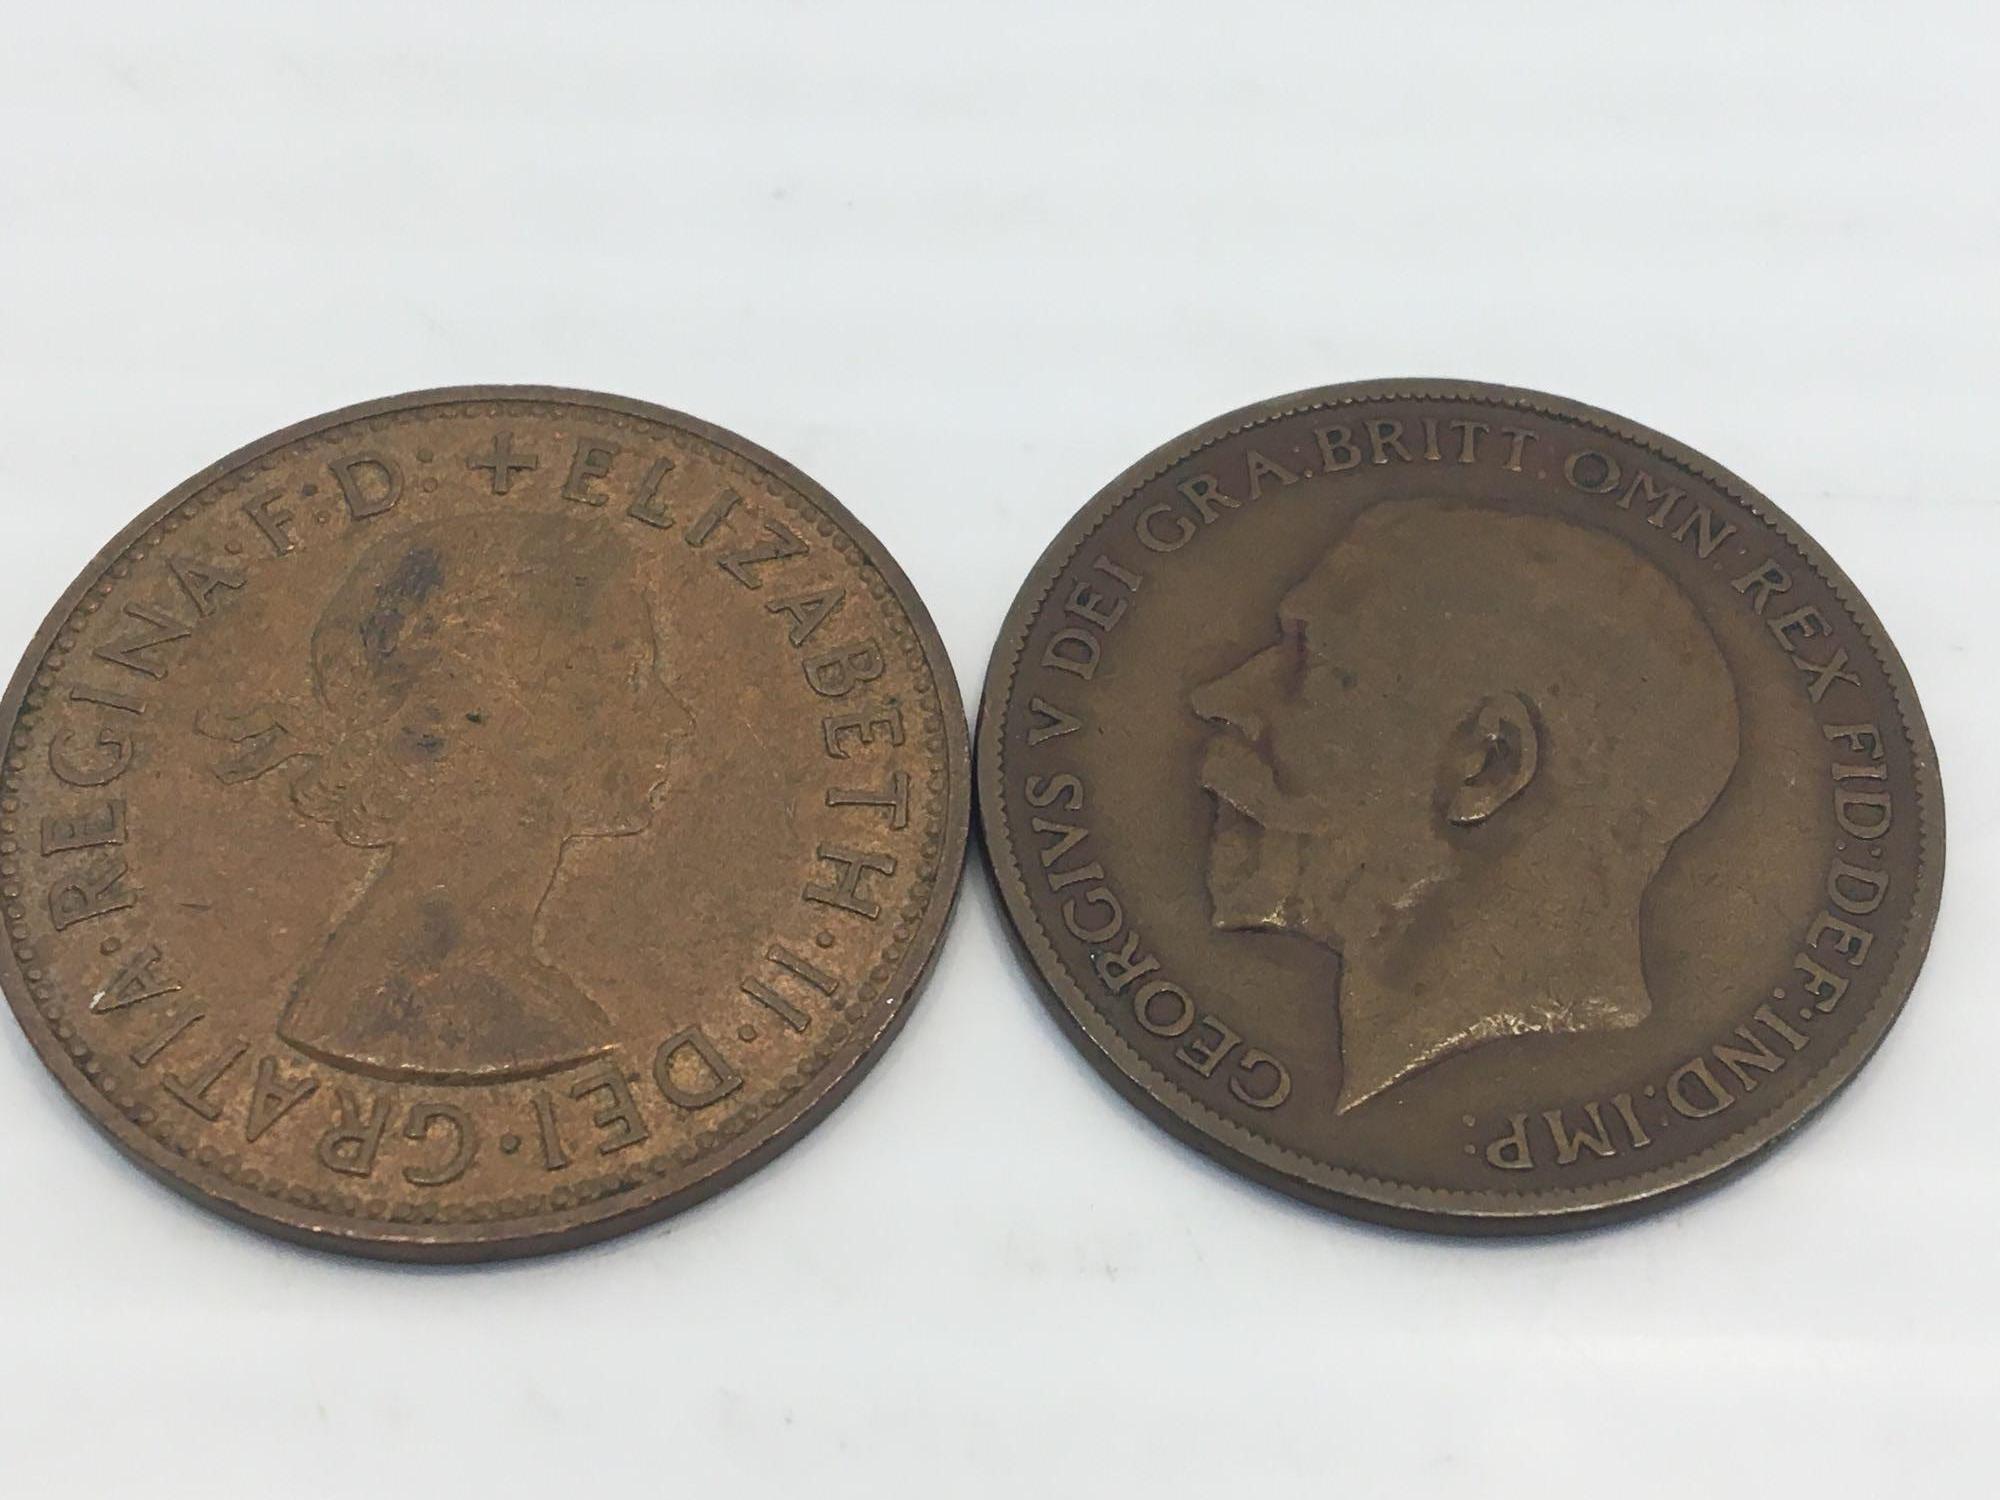 Foreign coins (England, Netherlands)